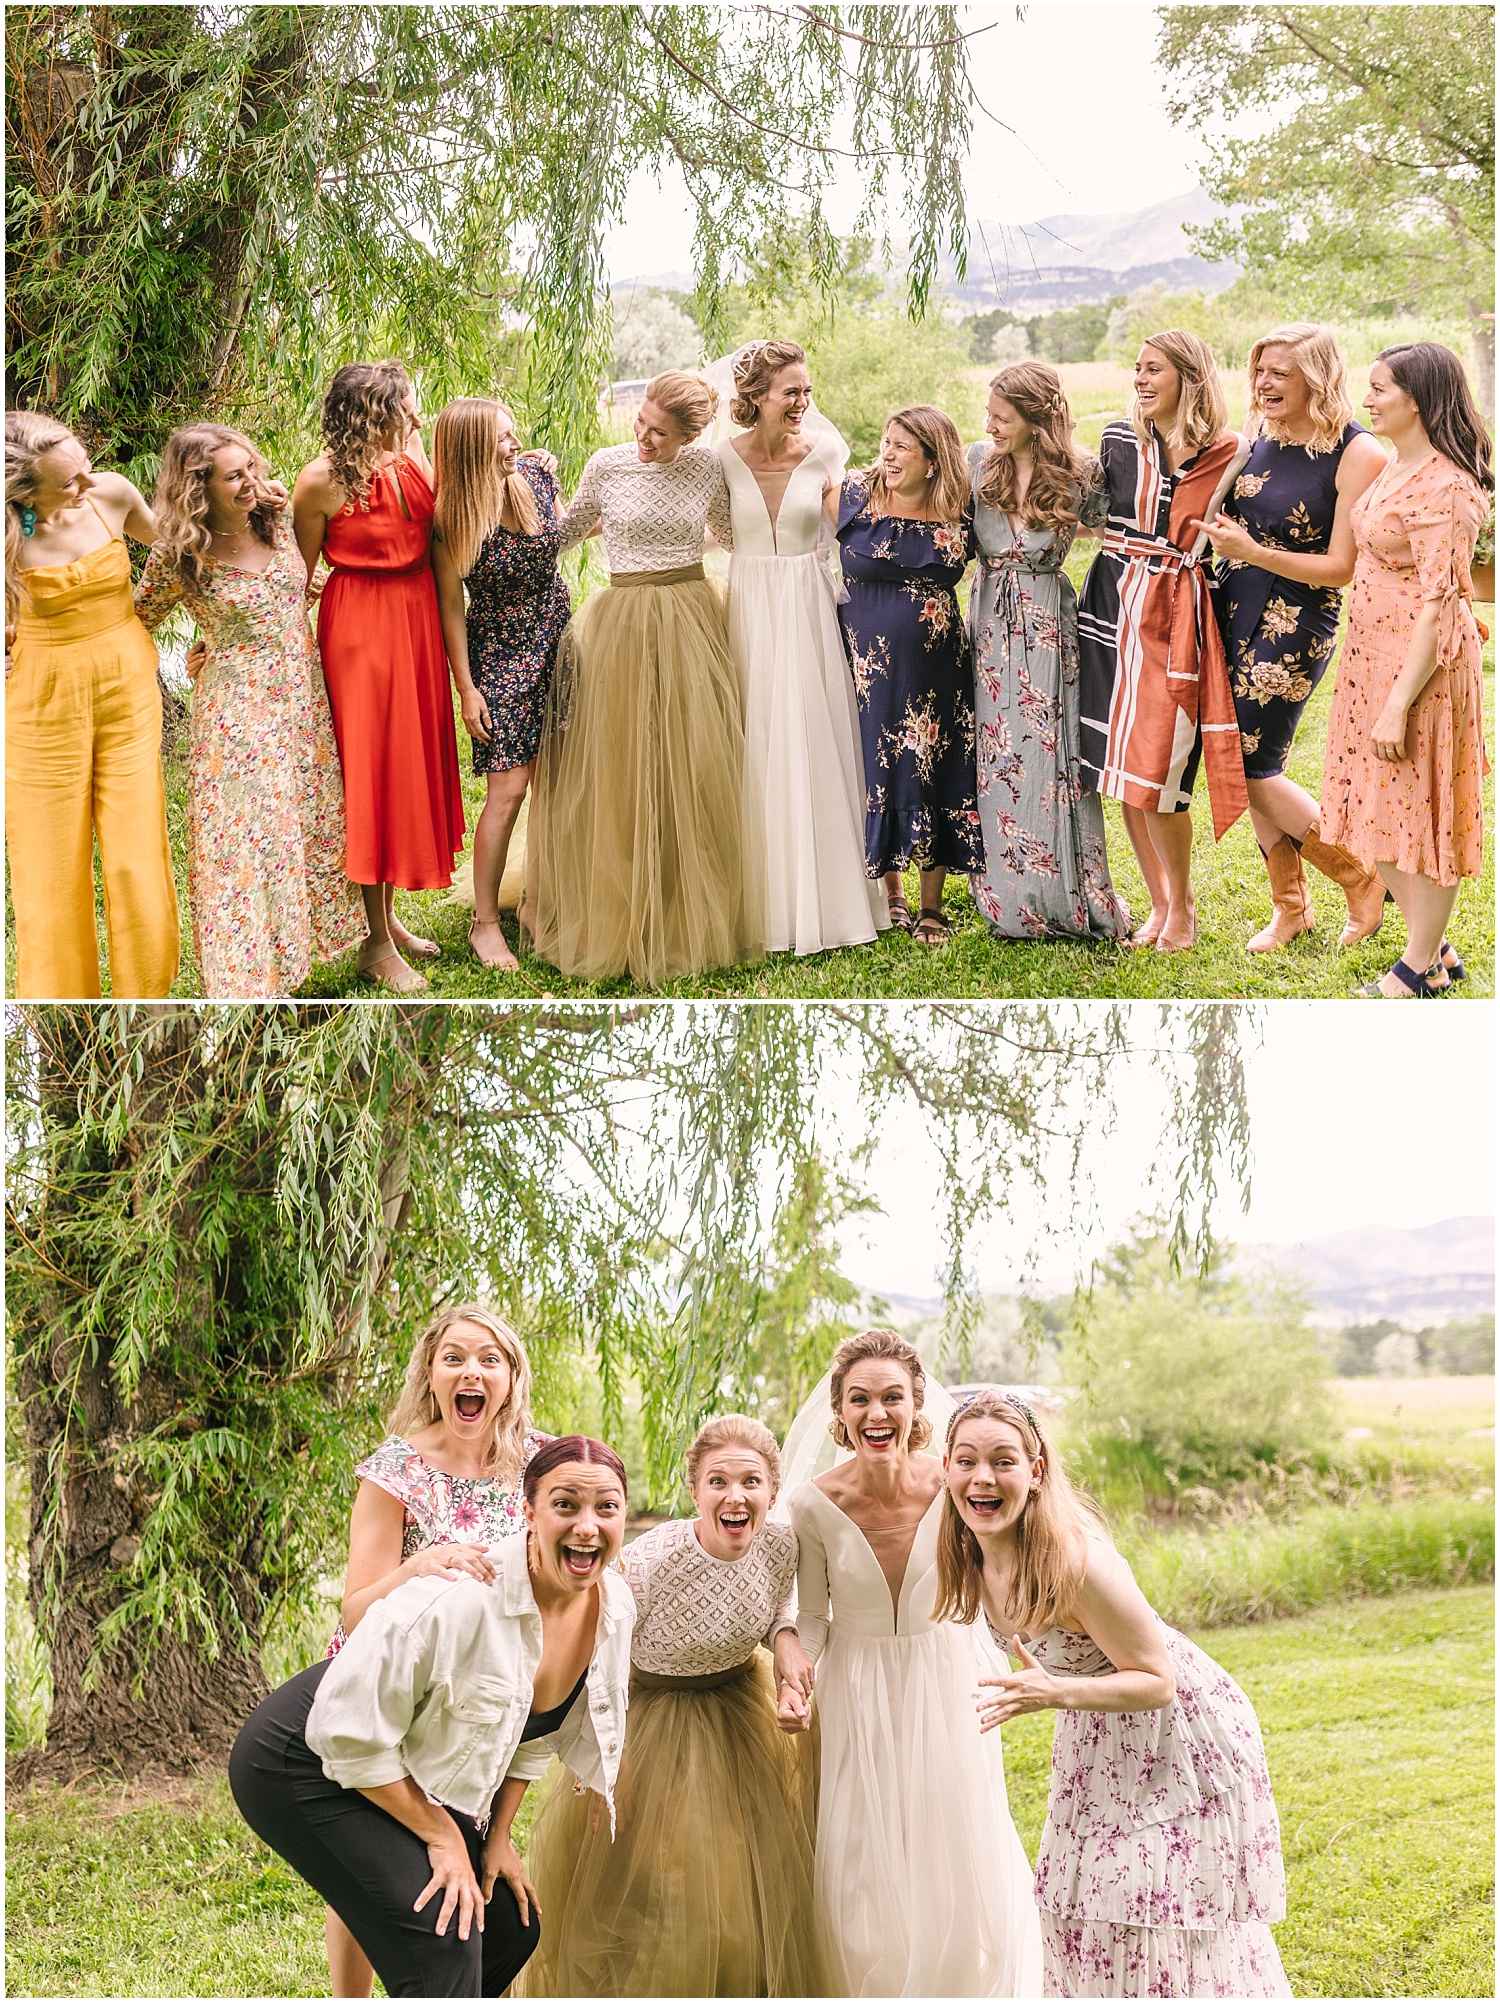 Unofficial wedding party photos with the brides and their friends